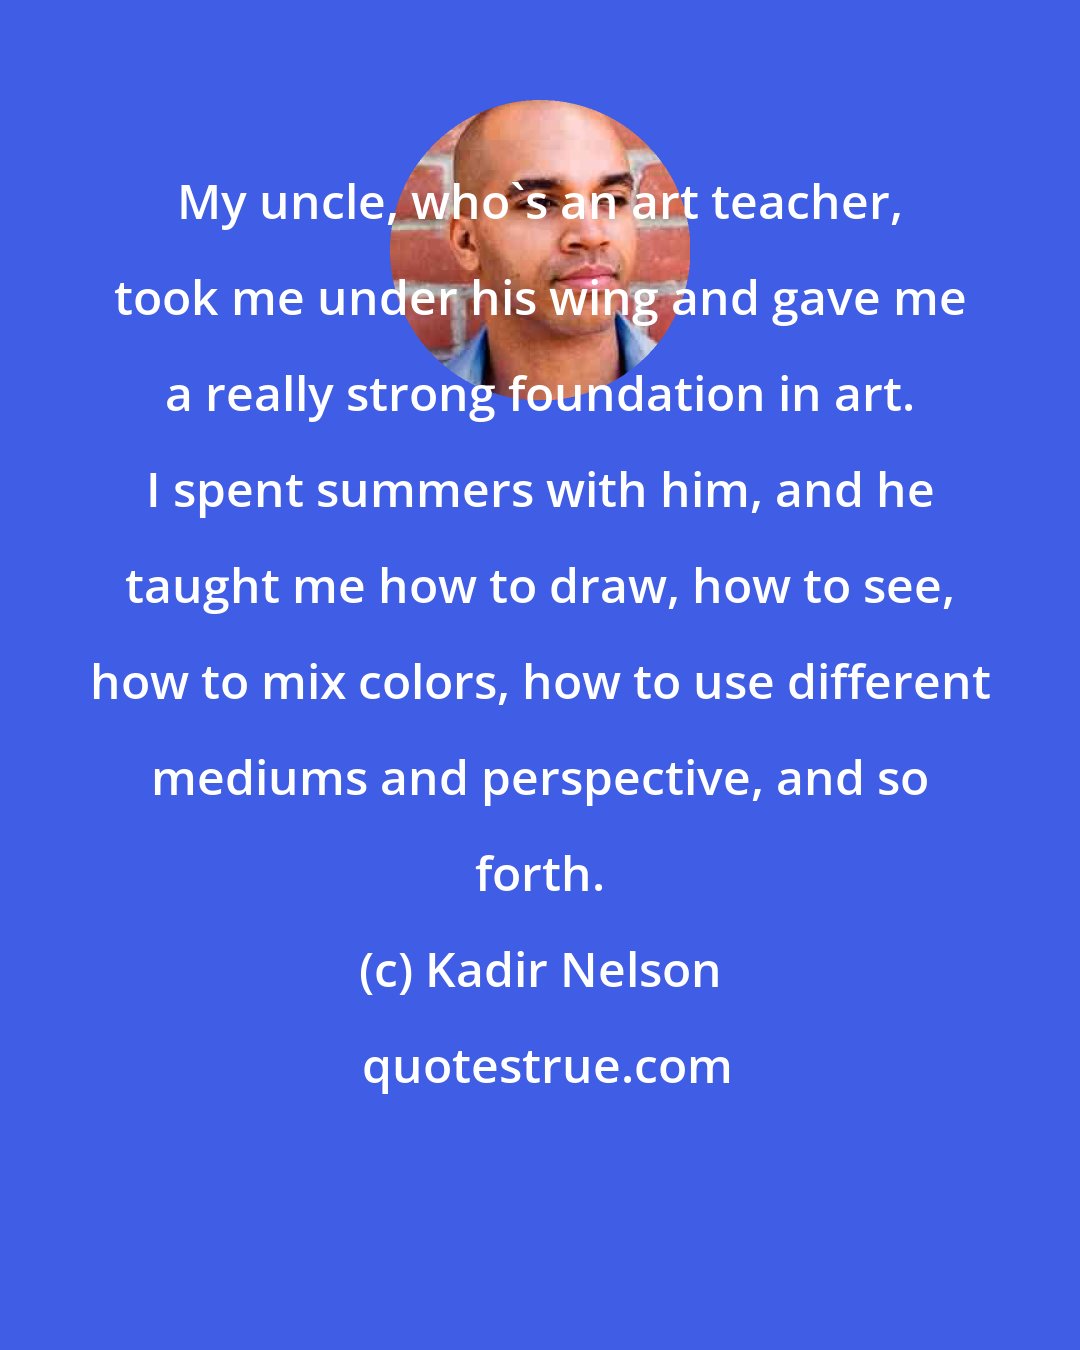 Kadir Nelson: My uncle, who's an art teacher, took me under his wing and gave me a really strong foundation in art. I spent summers with him, and he taught me how to draw, how to see, how to mix colors, how to use different mediums and perspective, and so forth.